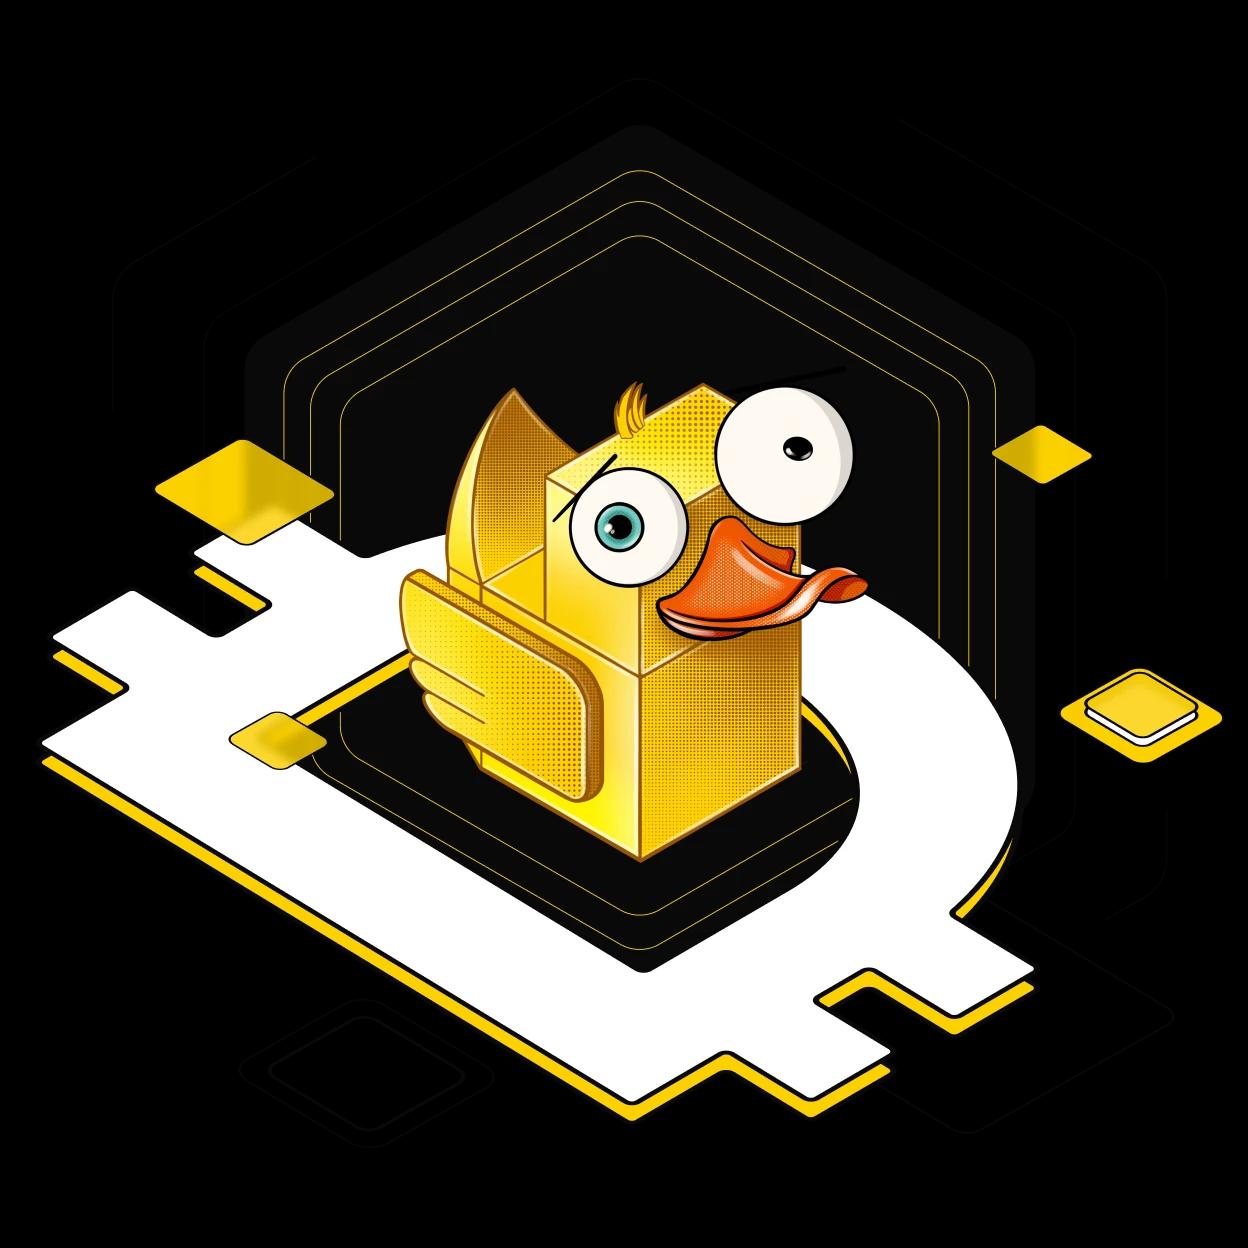 The Yellow duck represents Duckies canary network